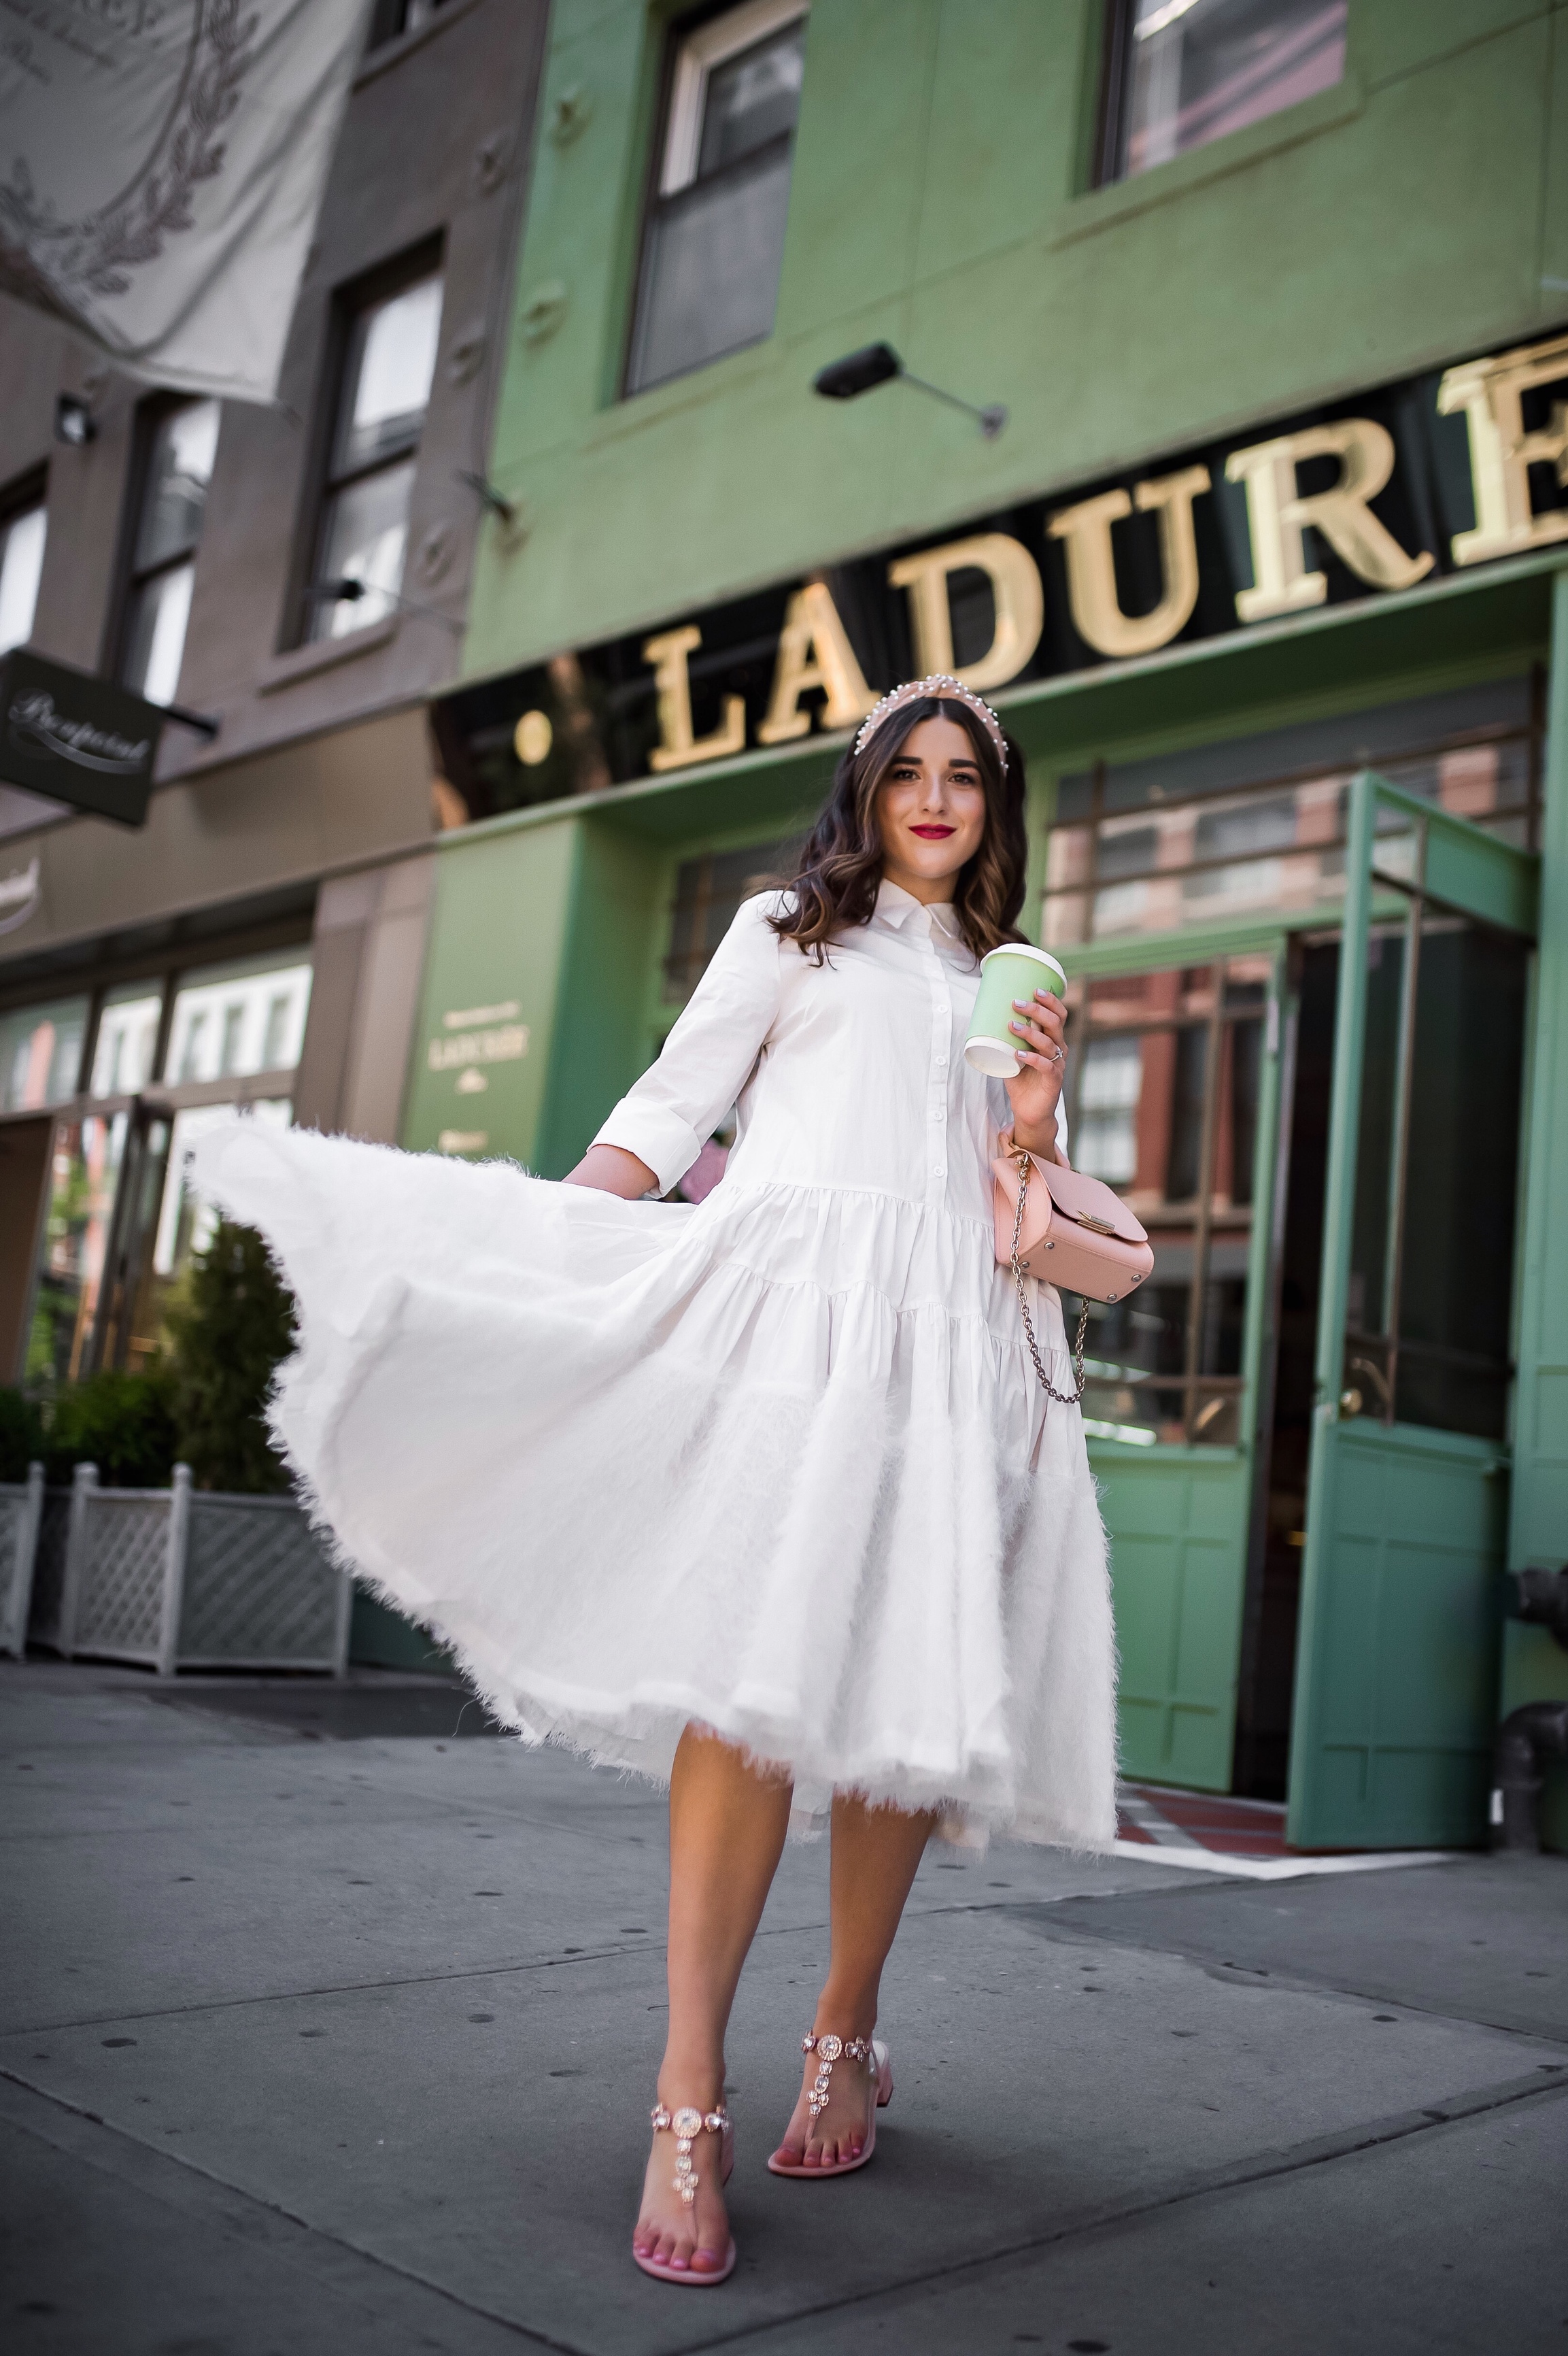 Debunking 8 Common Misconceptions About Fashion Bloggers White Midi Dress Pink Accessories Esther Santer Fashion Blog NYC Street Style Blogger Outfit OOTD Trendy Shopping Girl Headband How To Wear Pink Zac Posen Bag Jeweled Sandals La Duree Photoshoot.JPG